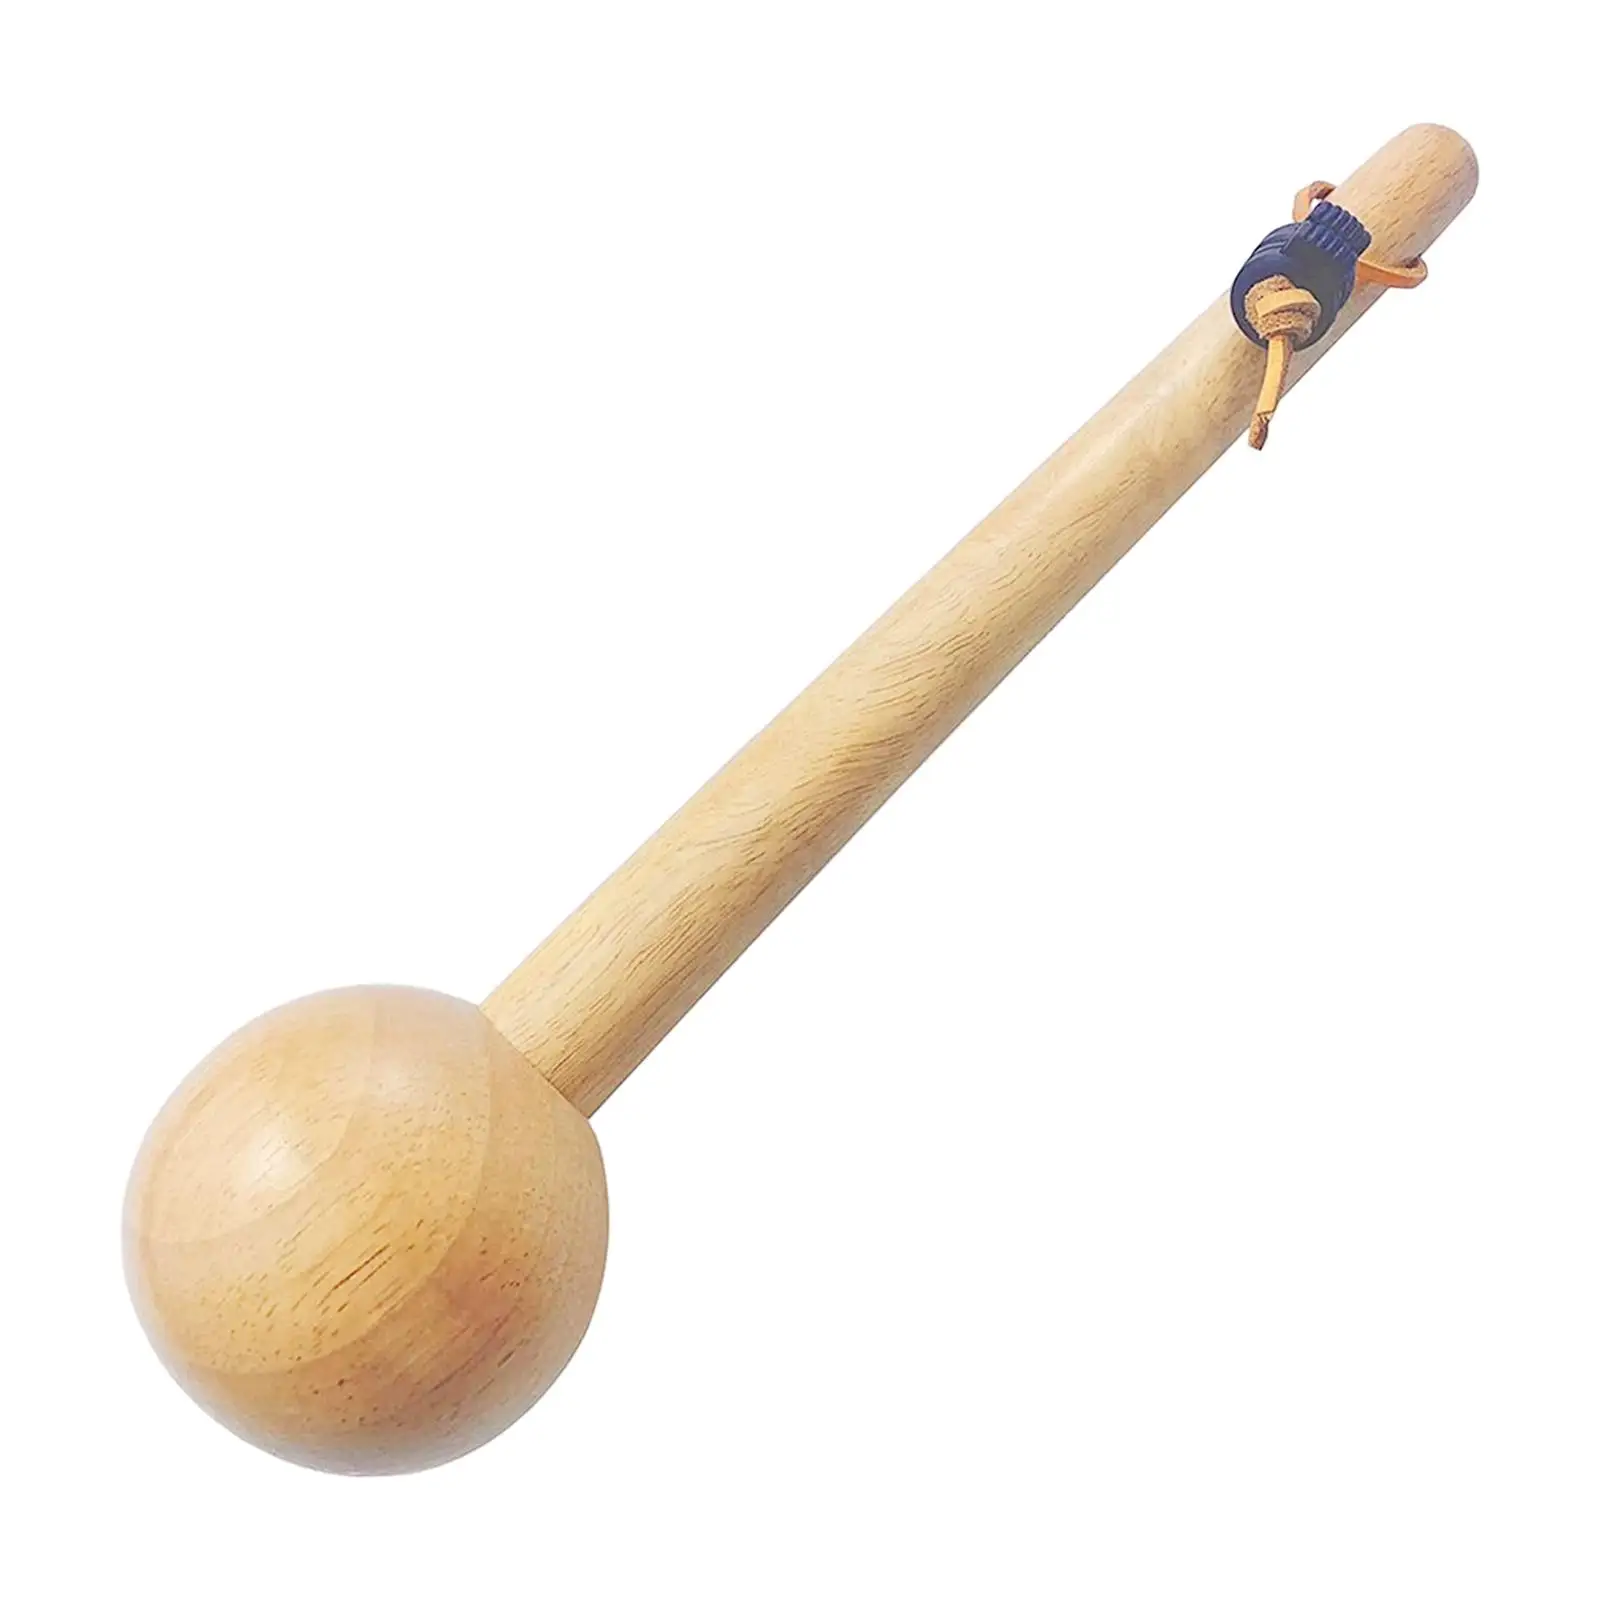 Rubber Wooden Softball Glove Mallet Equipment Sports Training Aid 12inch Portable Baseball Hammer for Practice Glove Care